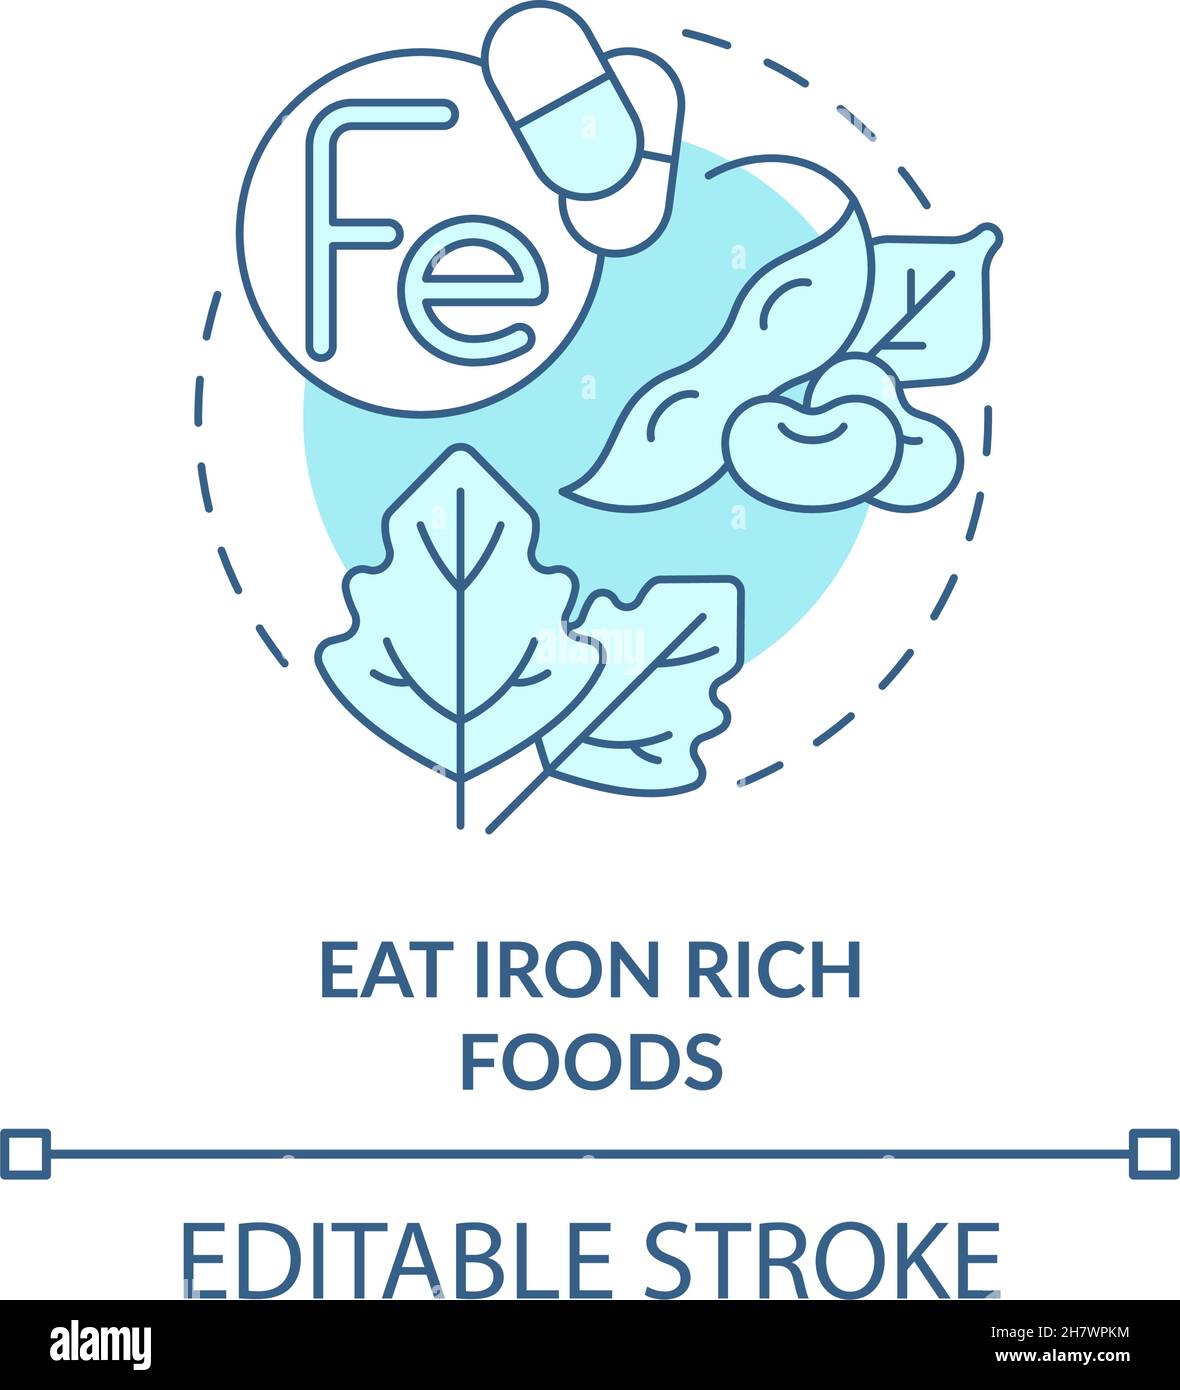 Iron rich food Stock Vector Images - Alamy